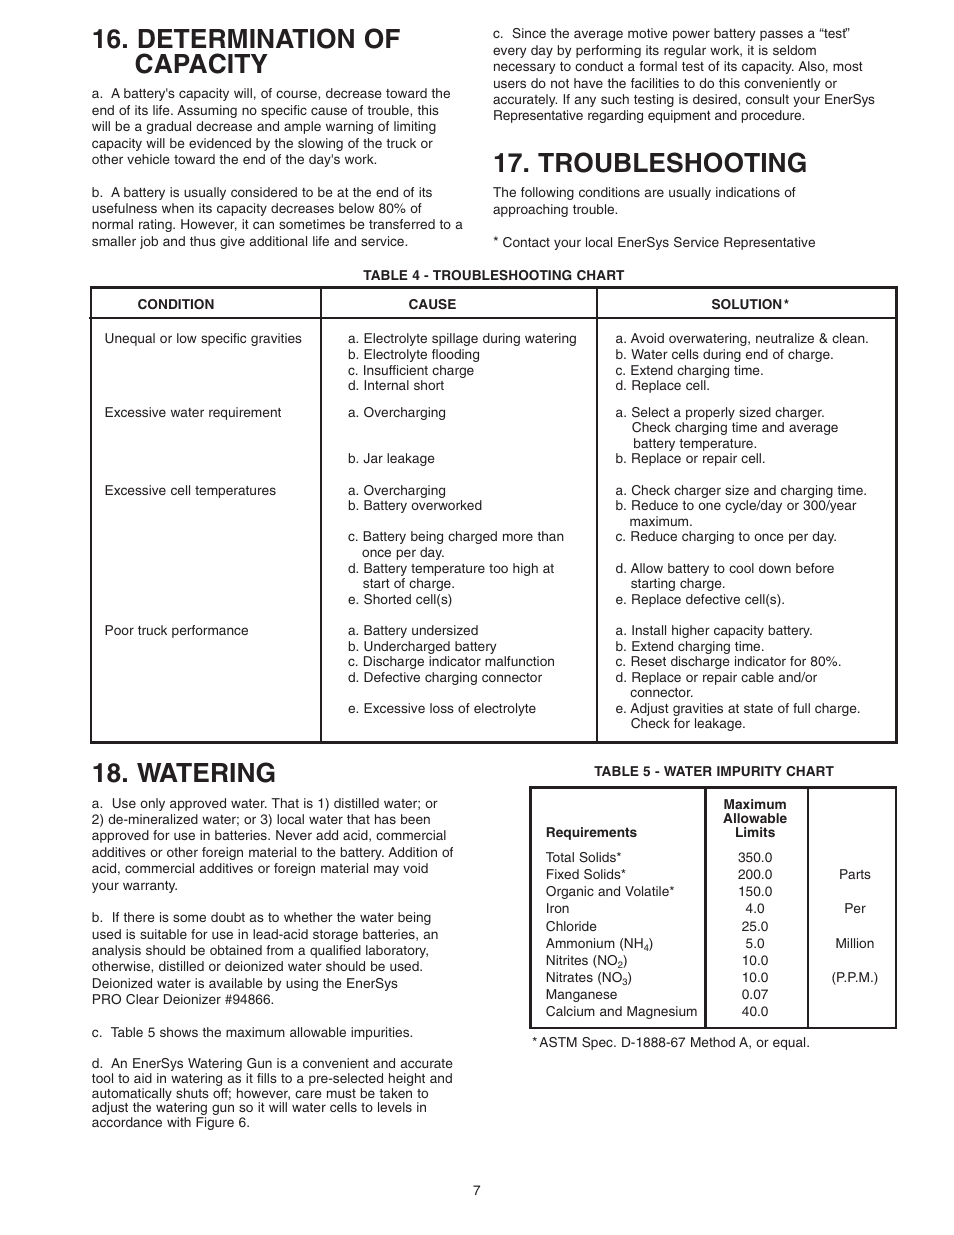 Determination of capacity, Watering, Troubleshooting | Ironclad Automobile Parts User Manual | Page 7 / 11